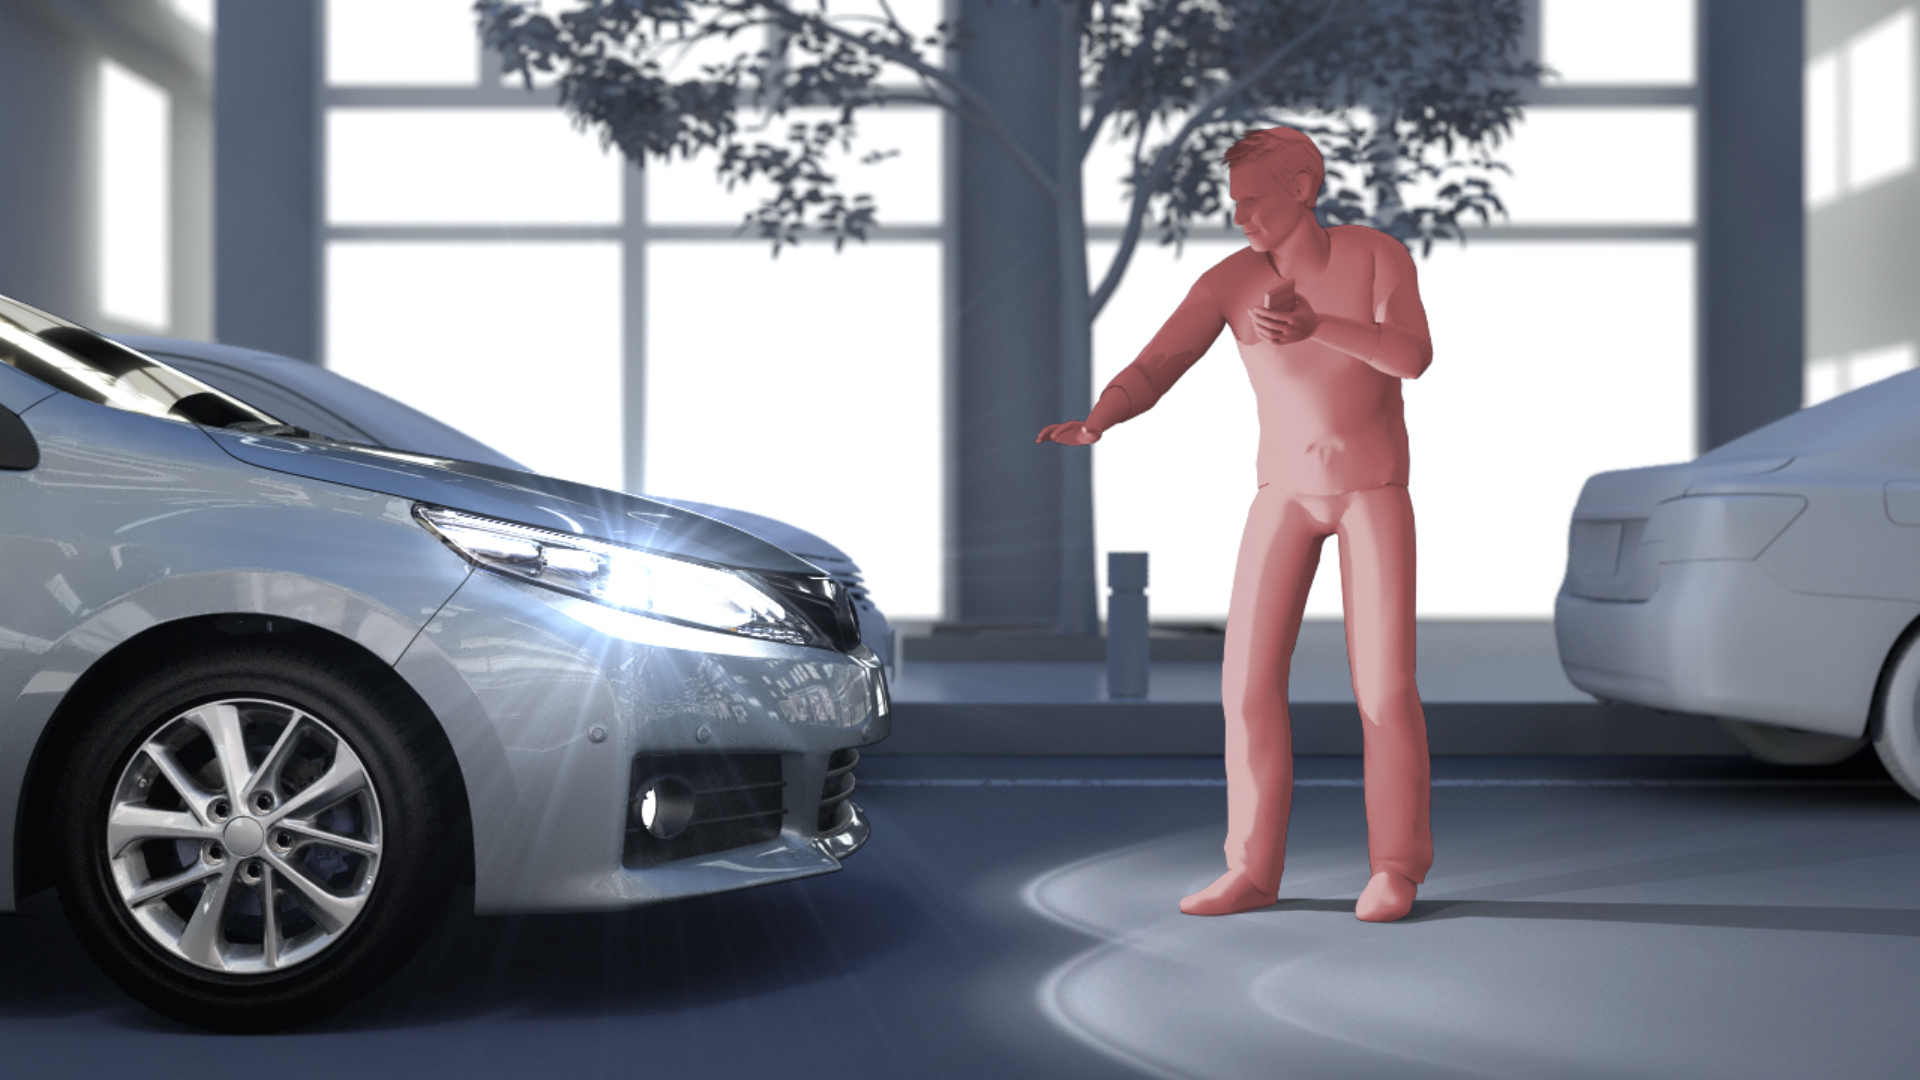 A rendering of a silver car approaching a pedestrian on a city street to demonstrate a Toyota Safety Sense feature